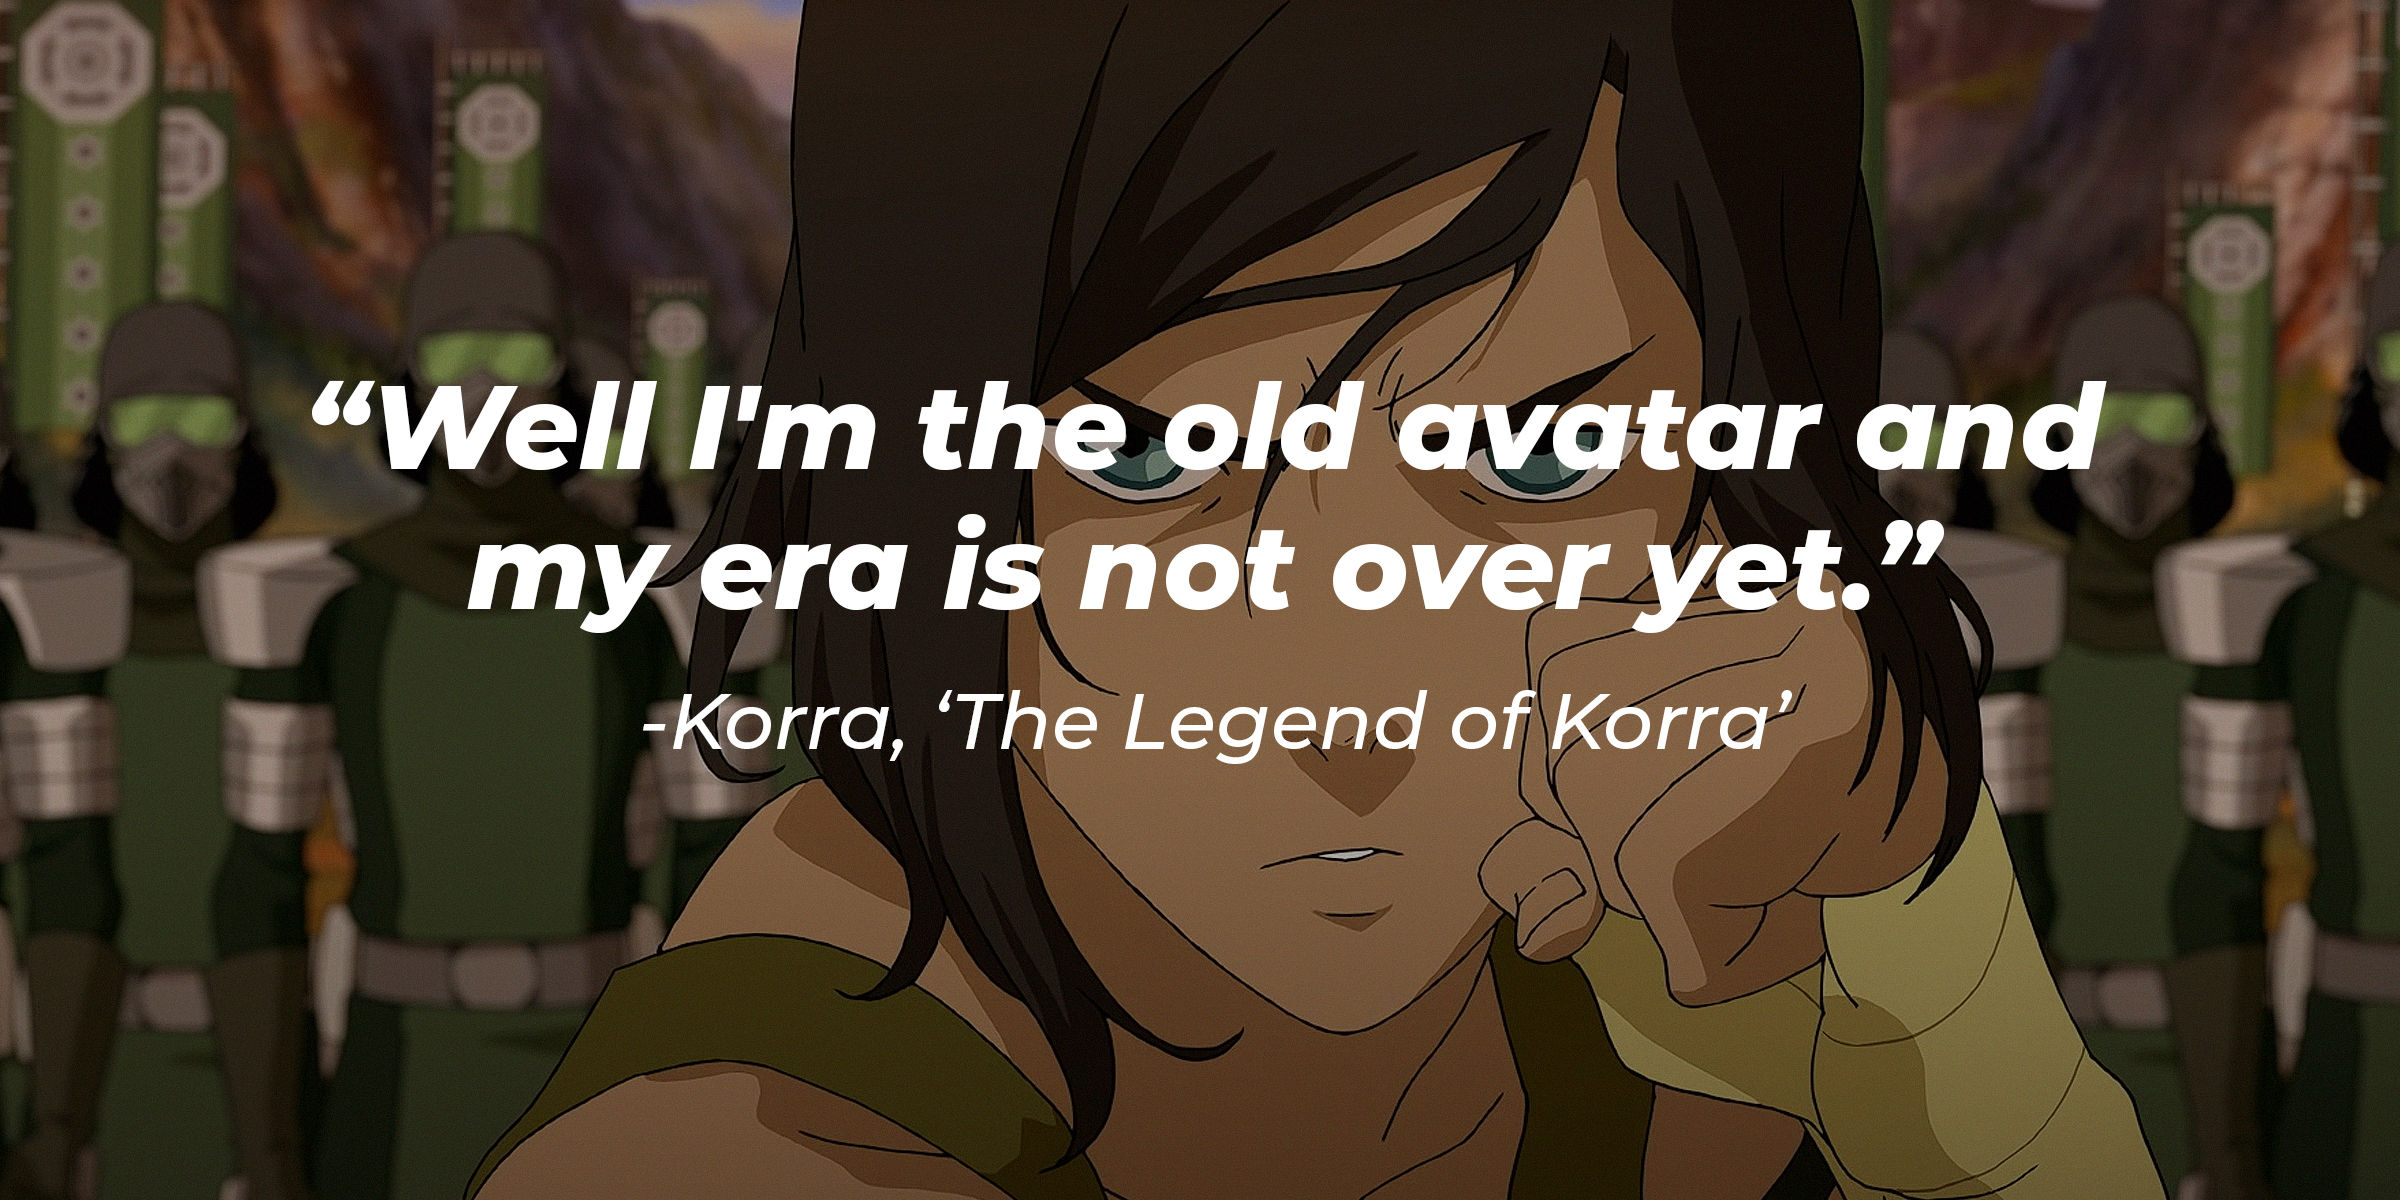 Image of Korra with the quote: "Well I'm the old avatar and my era is not over yet." | Source: Youtube.com/TeamAvatar